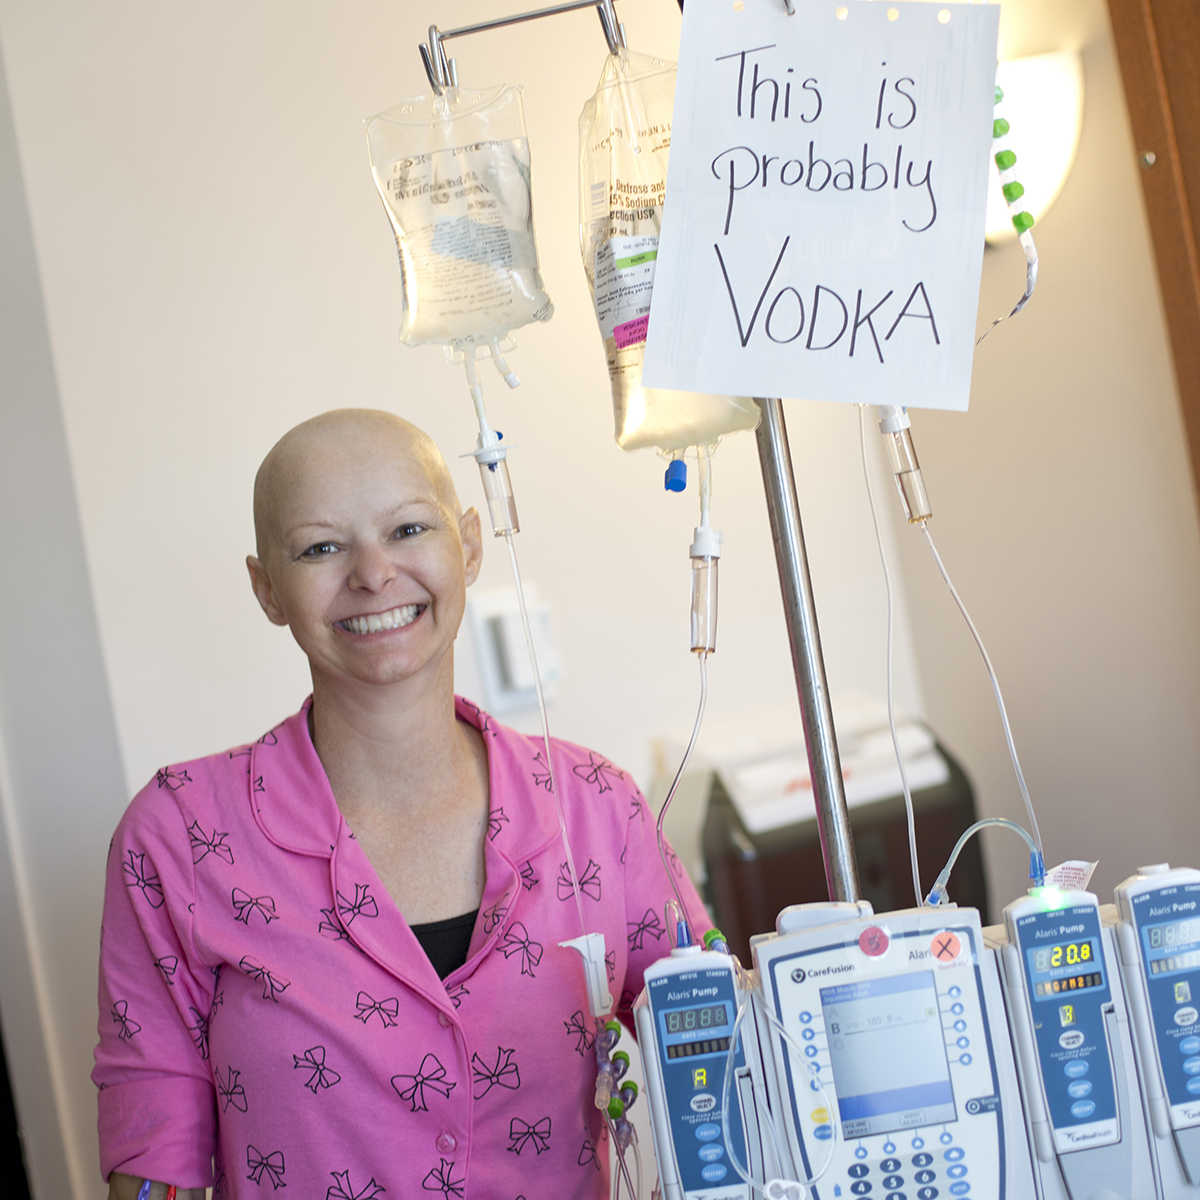 Smiling cancer patient standing next to an IV with sign that says, "this is probably vodka"